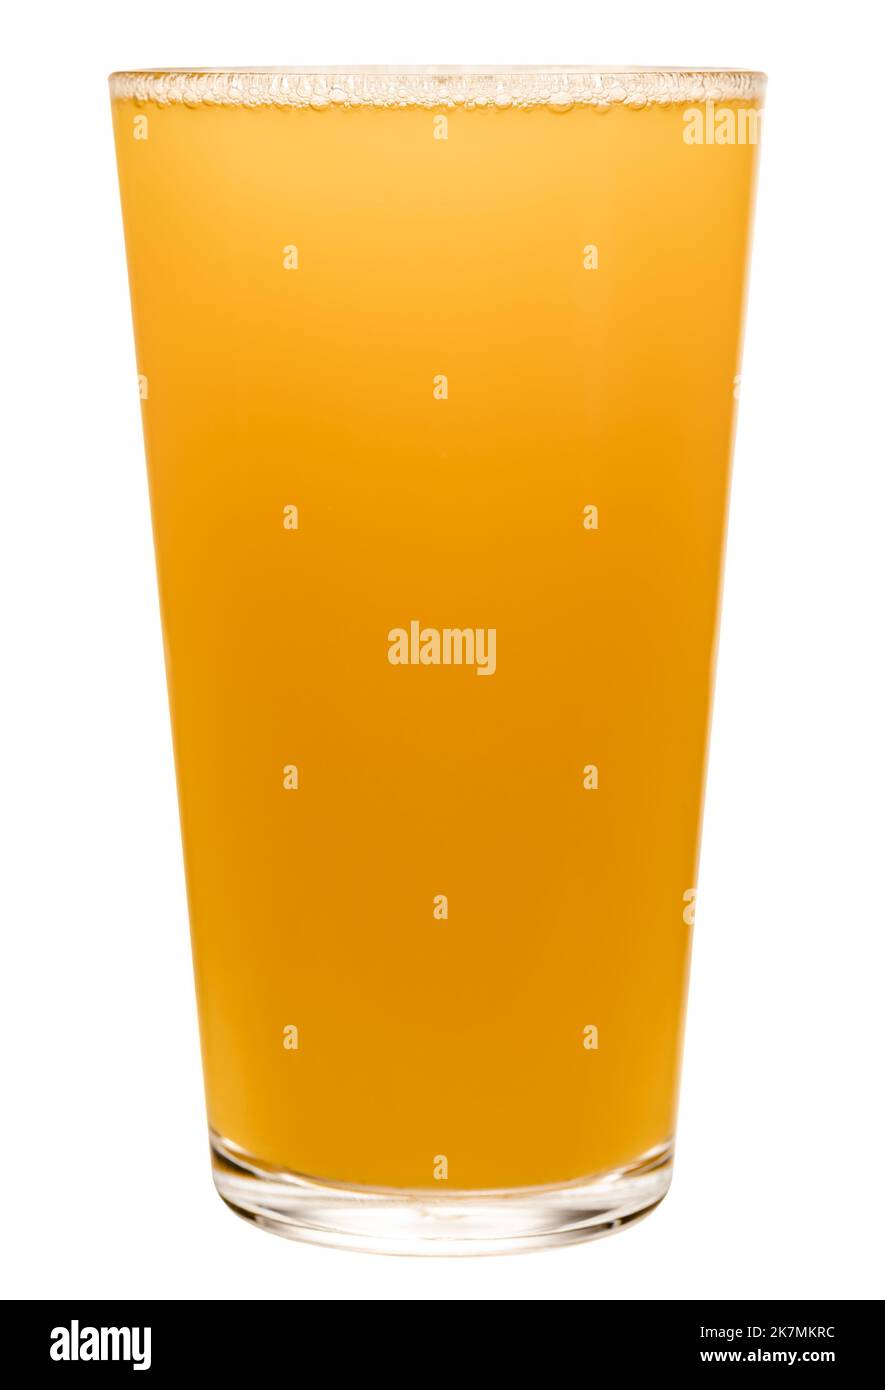 Full shaker pint glass of hazy New England IPA (NEIPA) pale ale beer isolated on white background Stock Photo